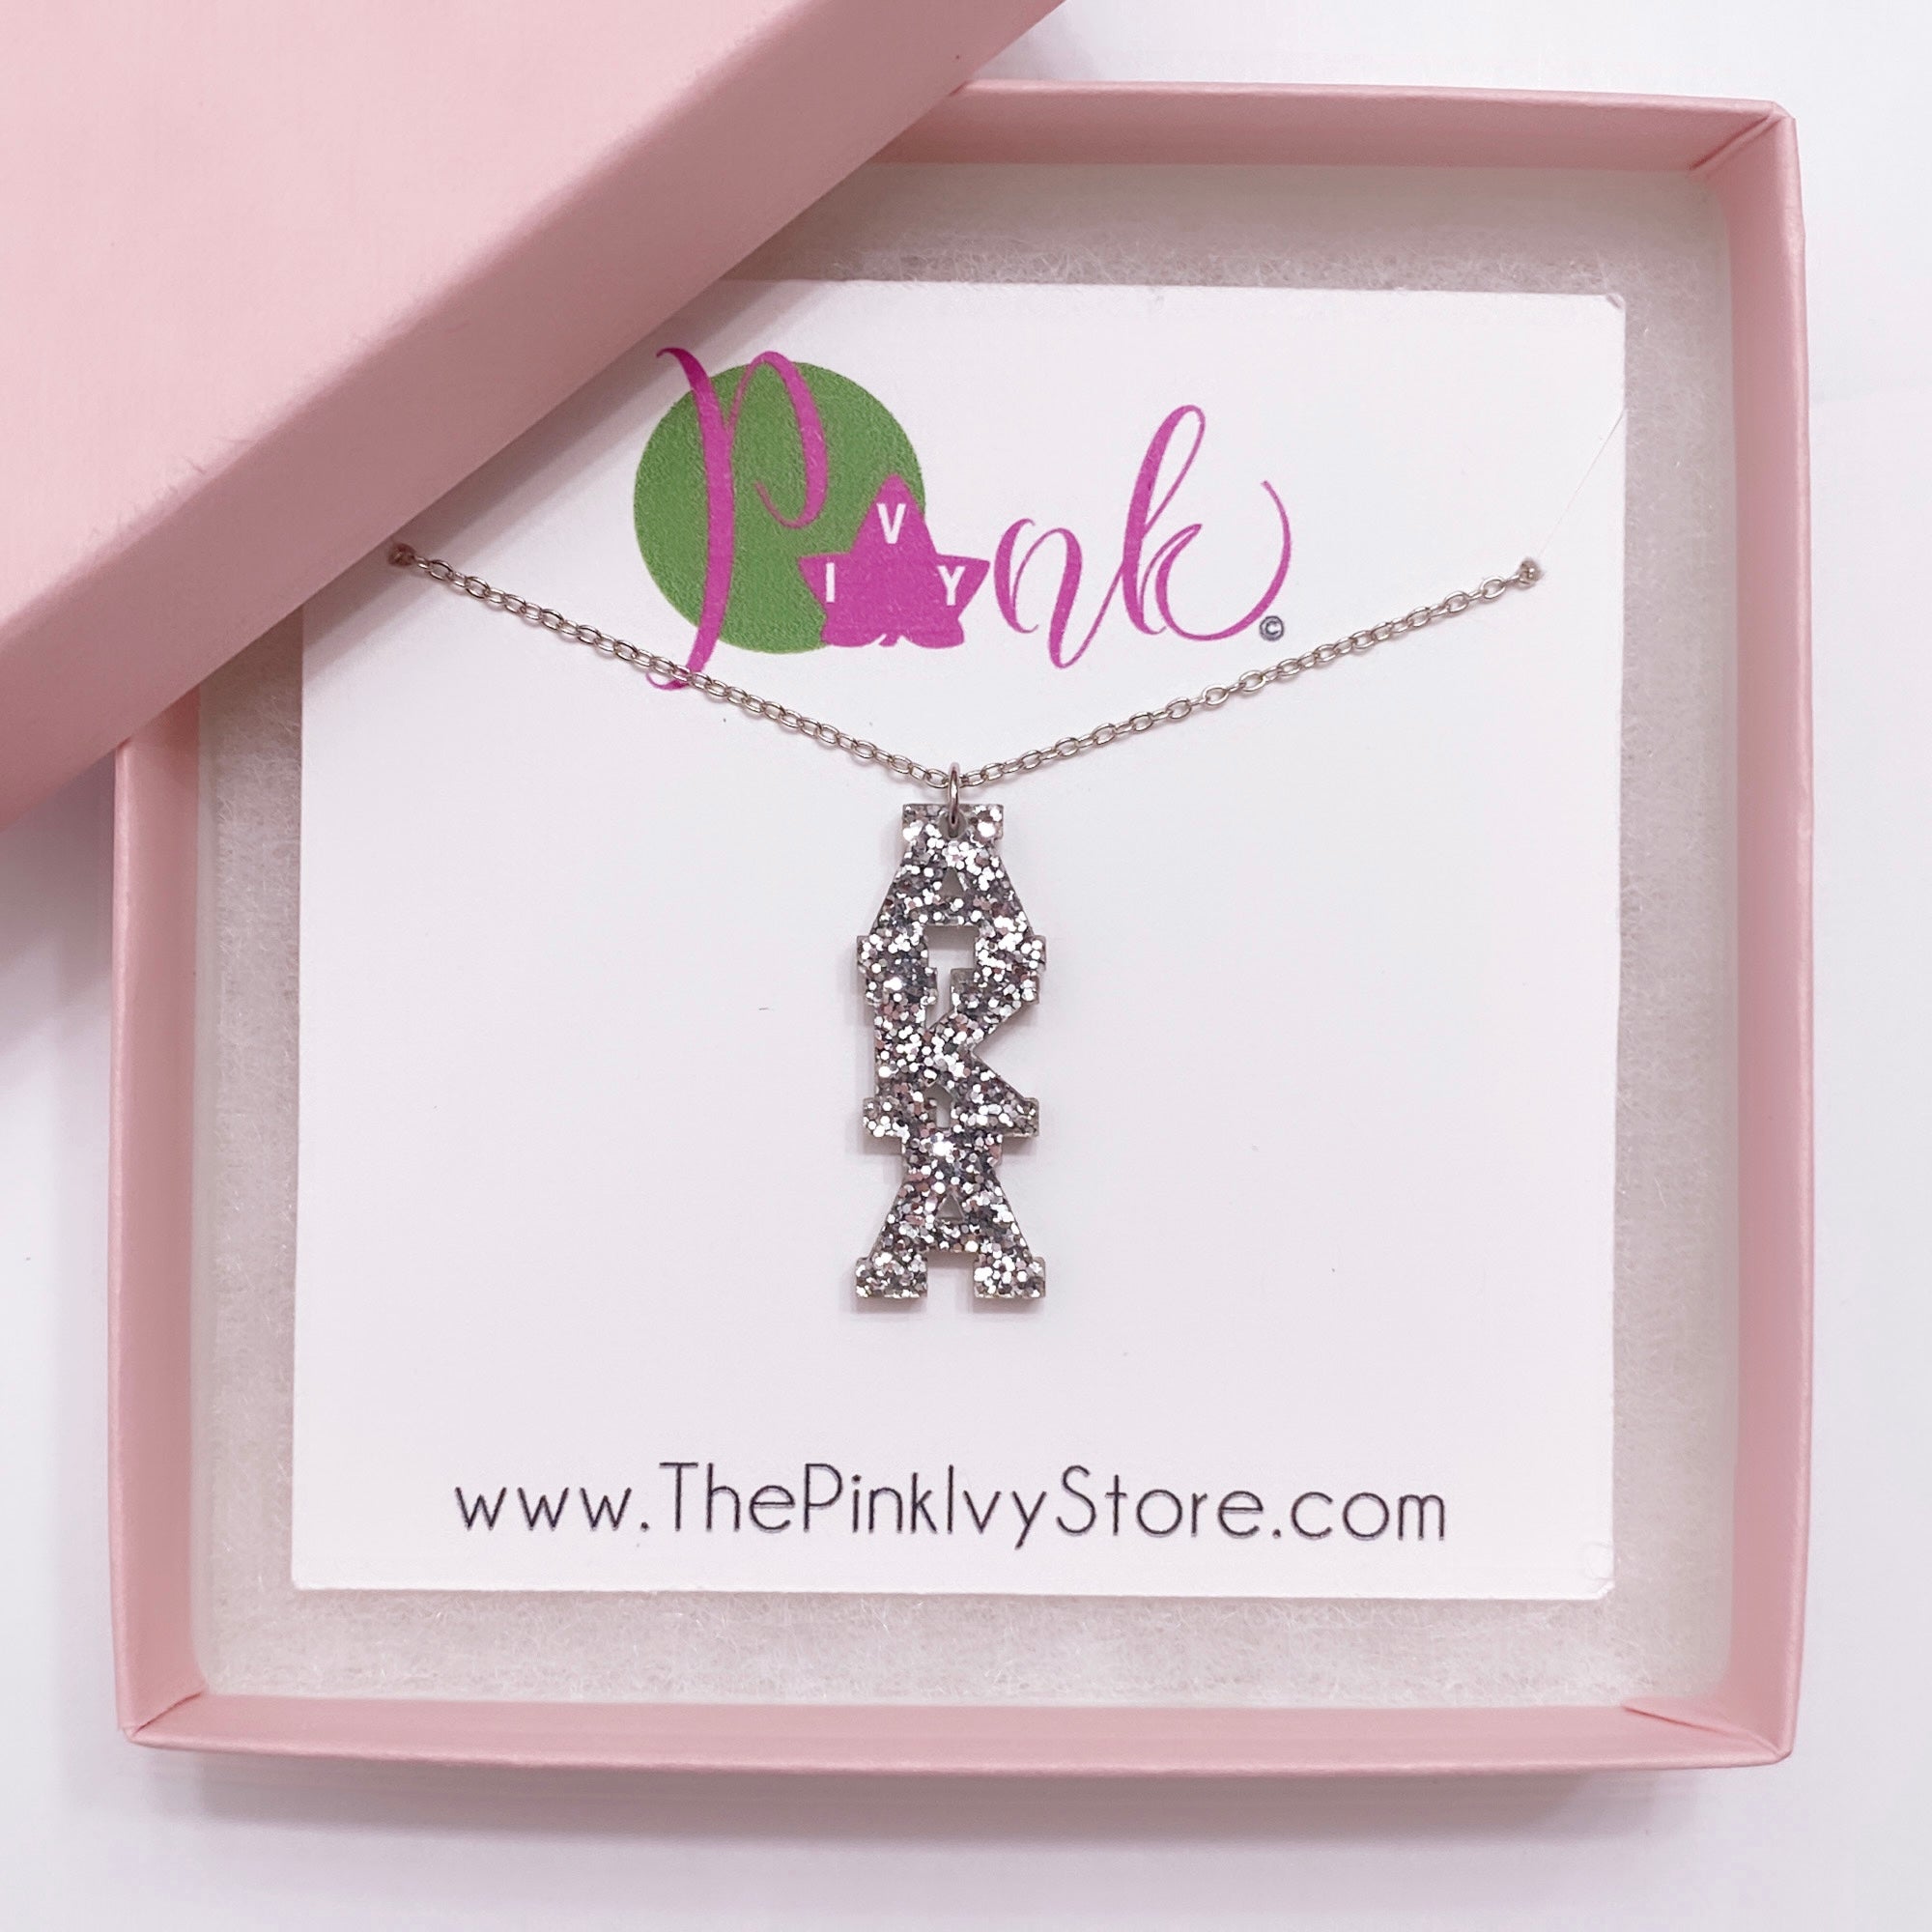  Dainty AKA necklace by The Chic Greek